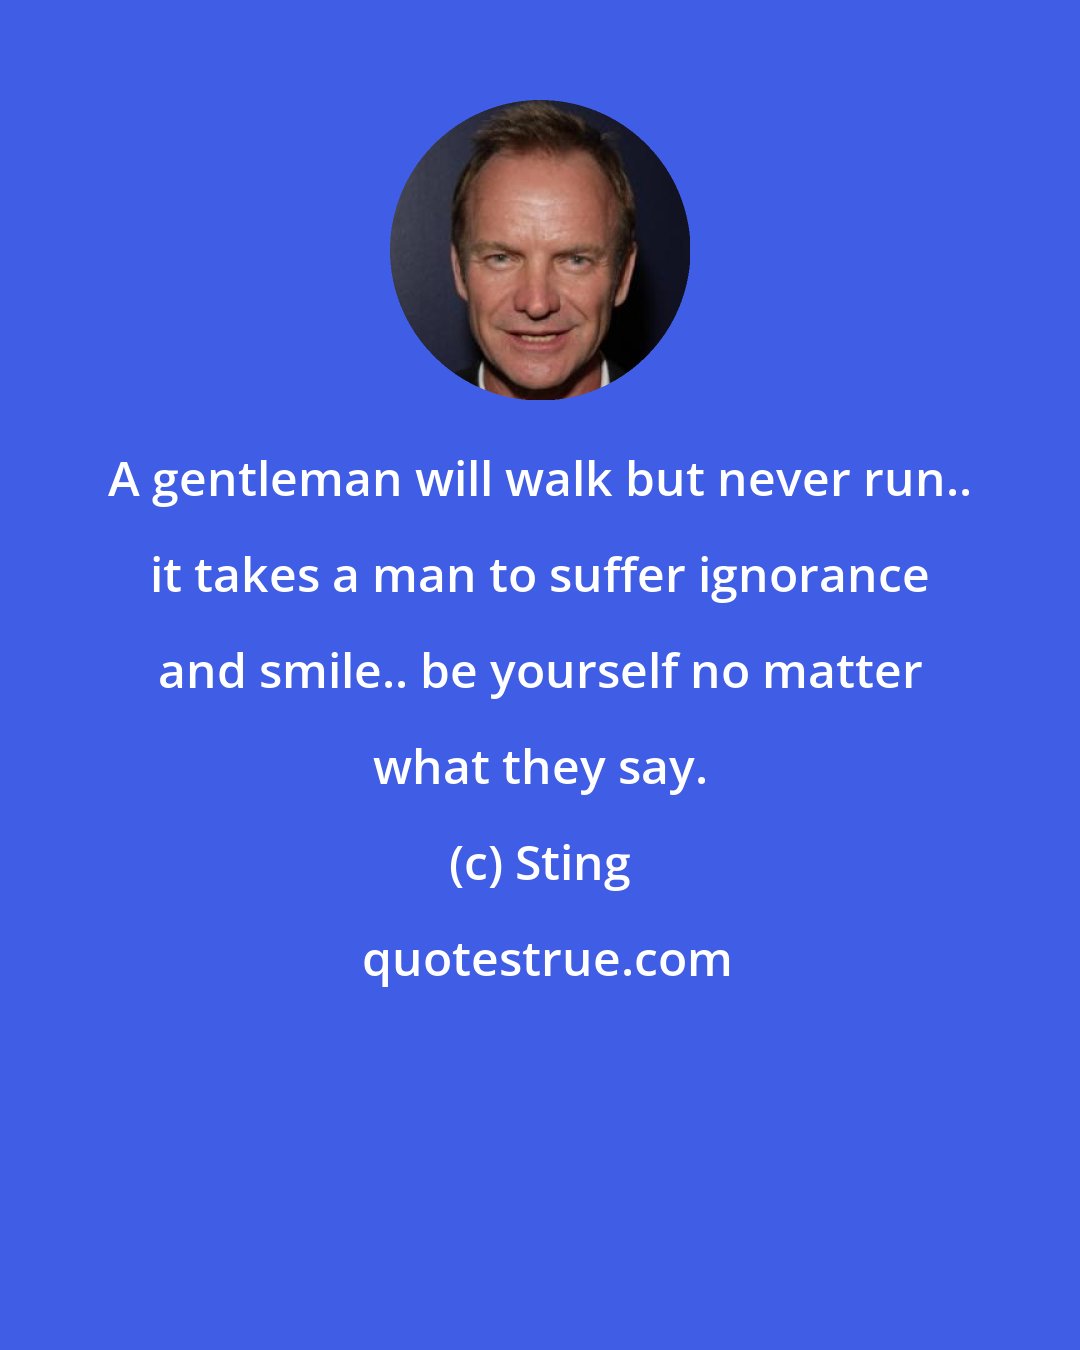 Sting: A gentleman will walk but never run.. it takes a man to suffer ignorance and smile.. be yourself no matter what they say.